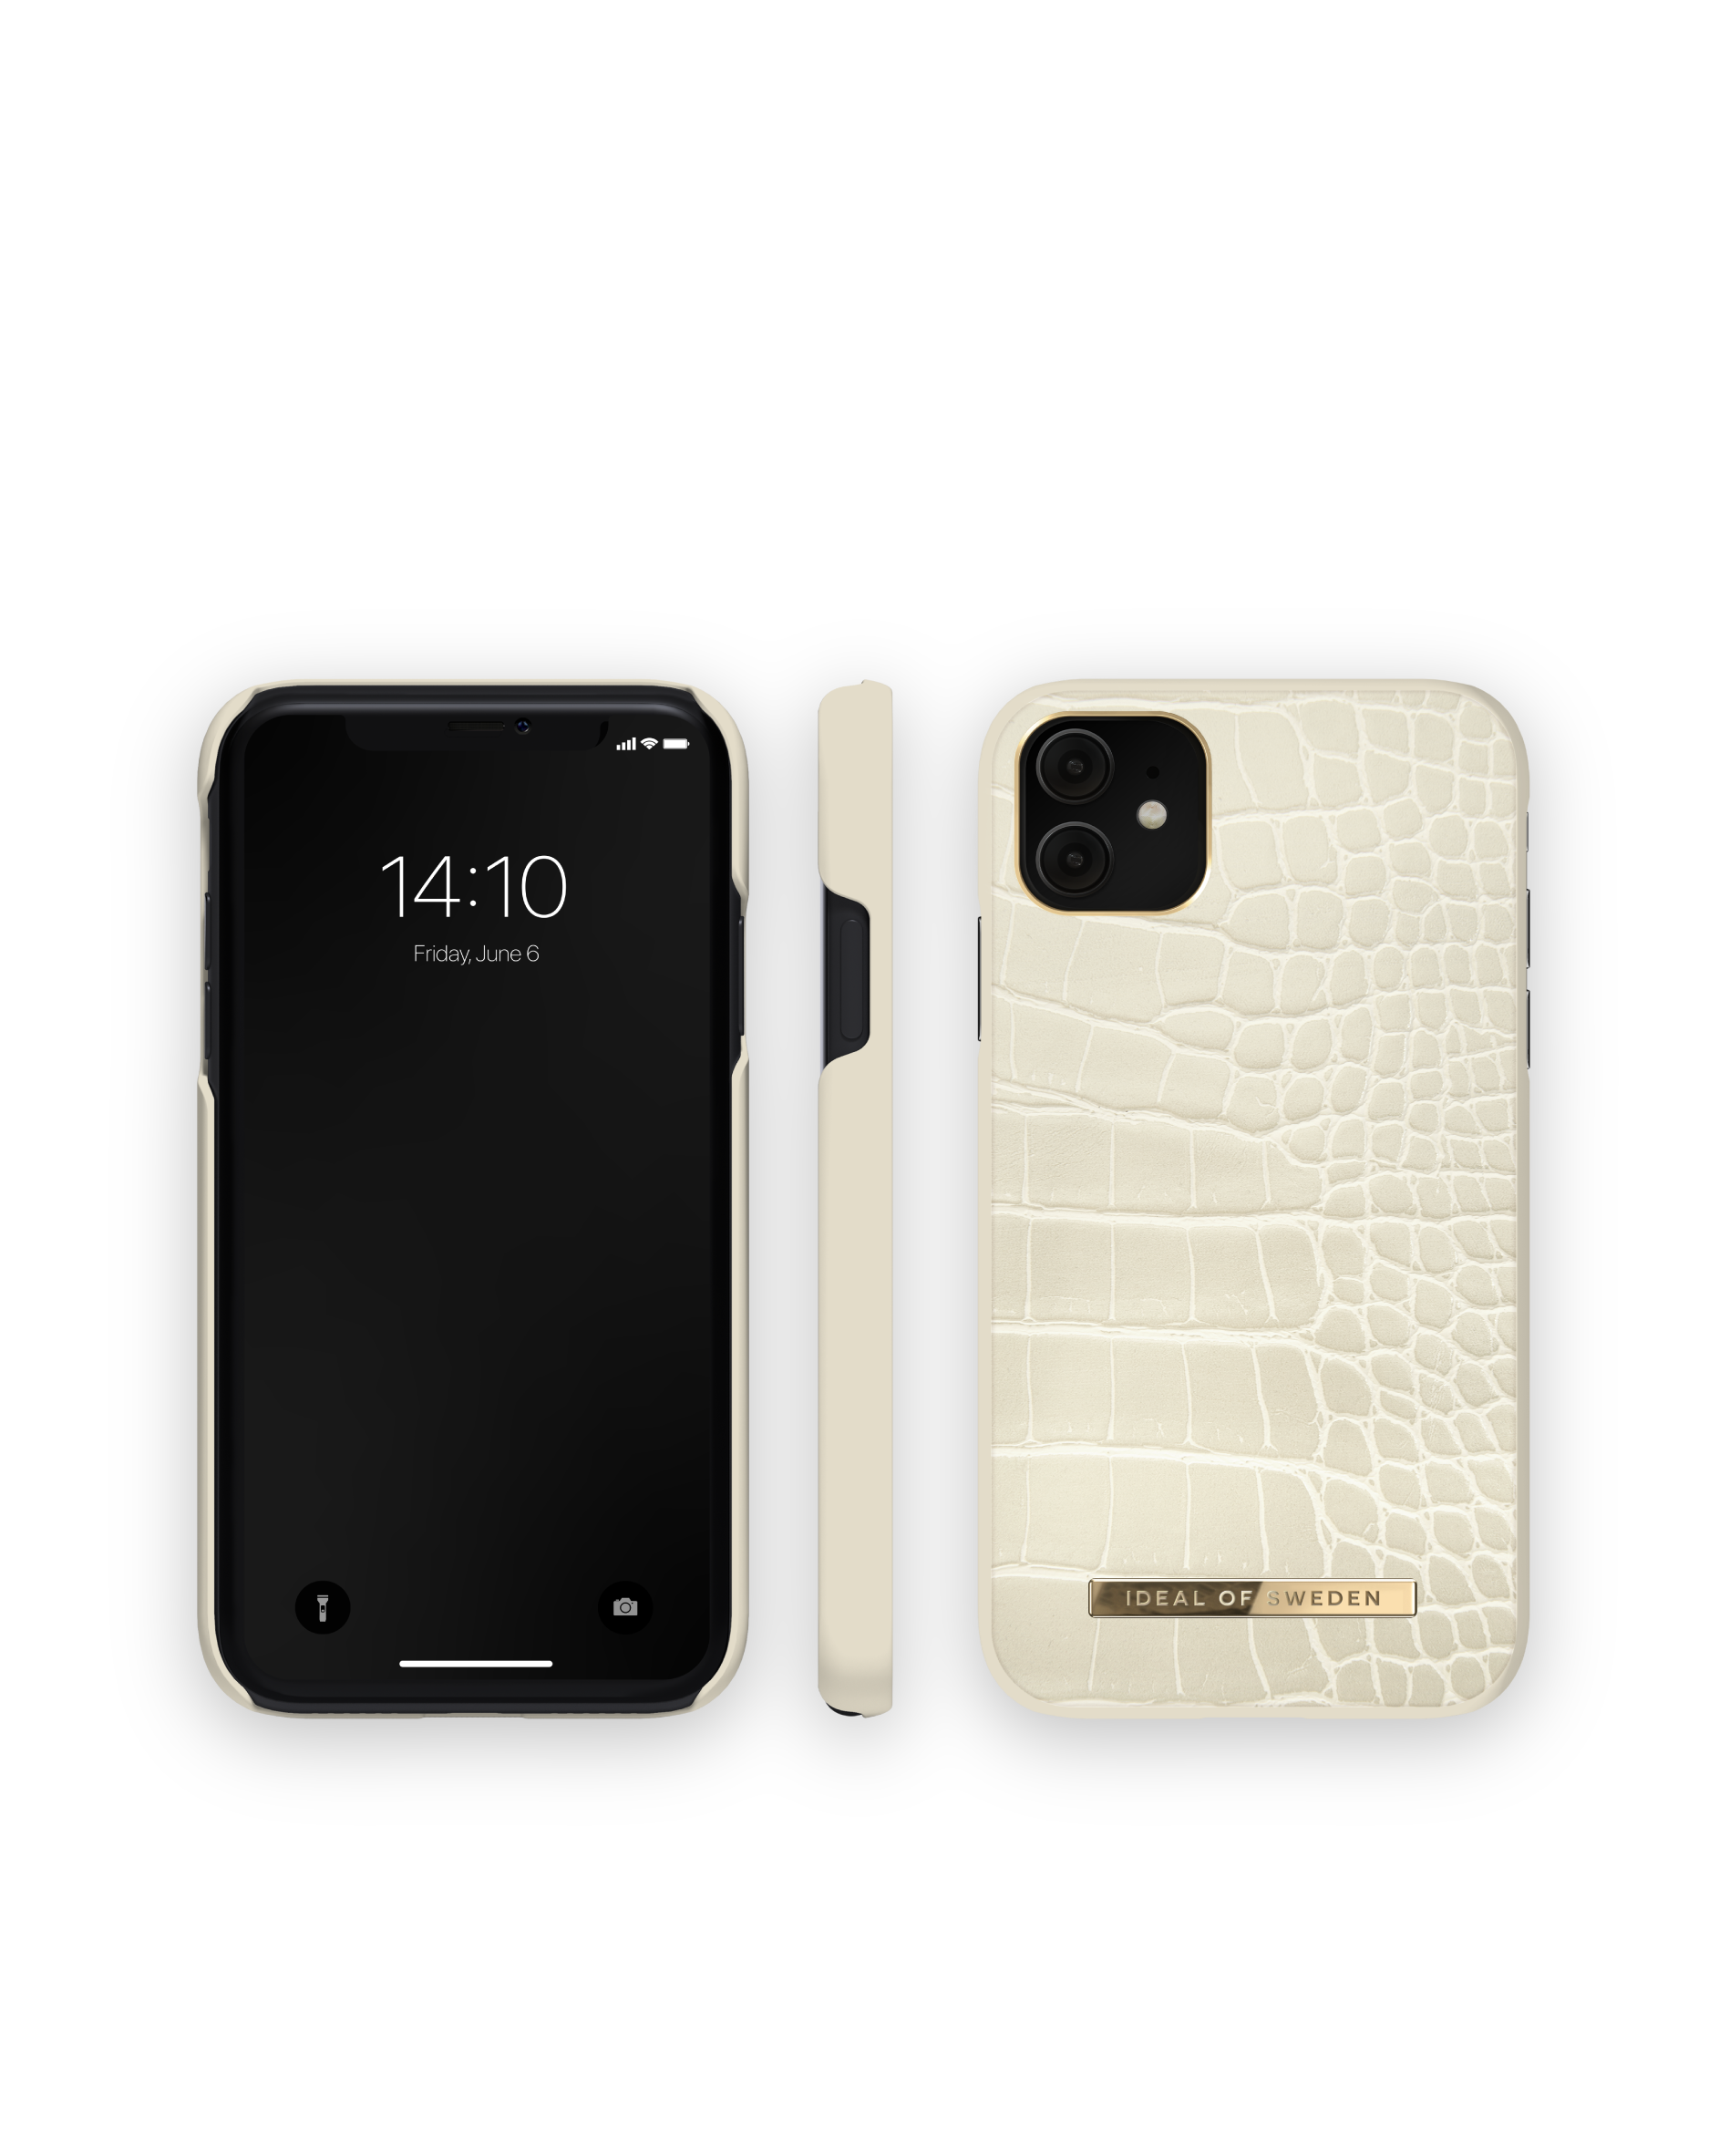 IDACSS22-I1961-395, iPhone SWEDEN Backcover, IDEAL OF Beige Apple, Recycled - 11 / iPhone XR, Croco Cream